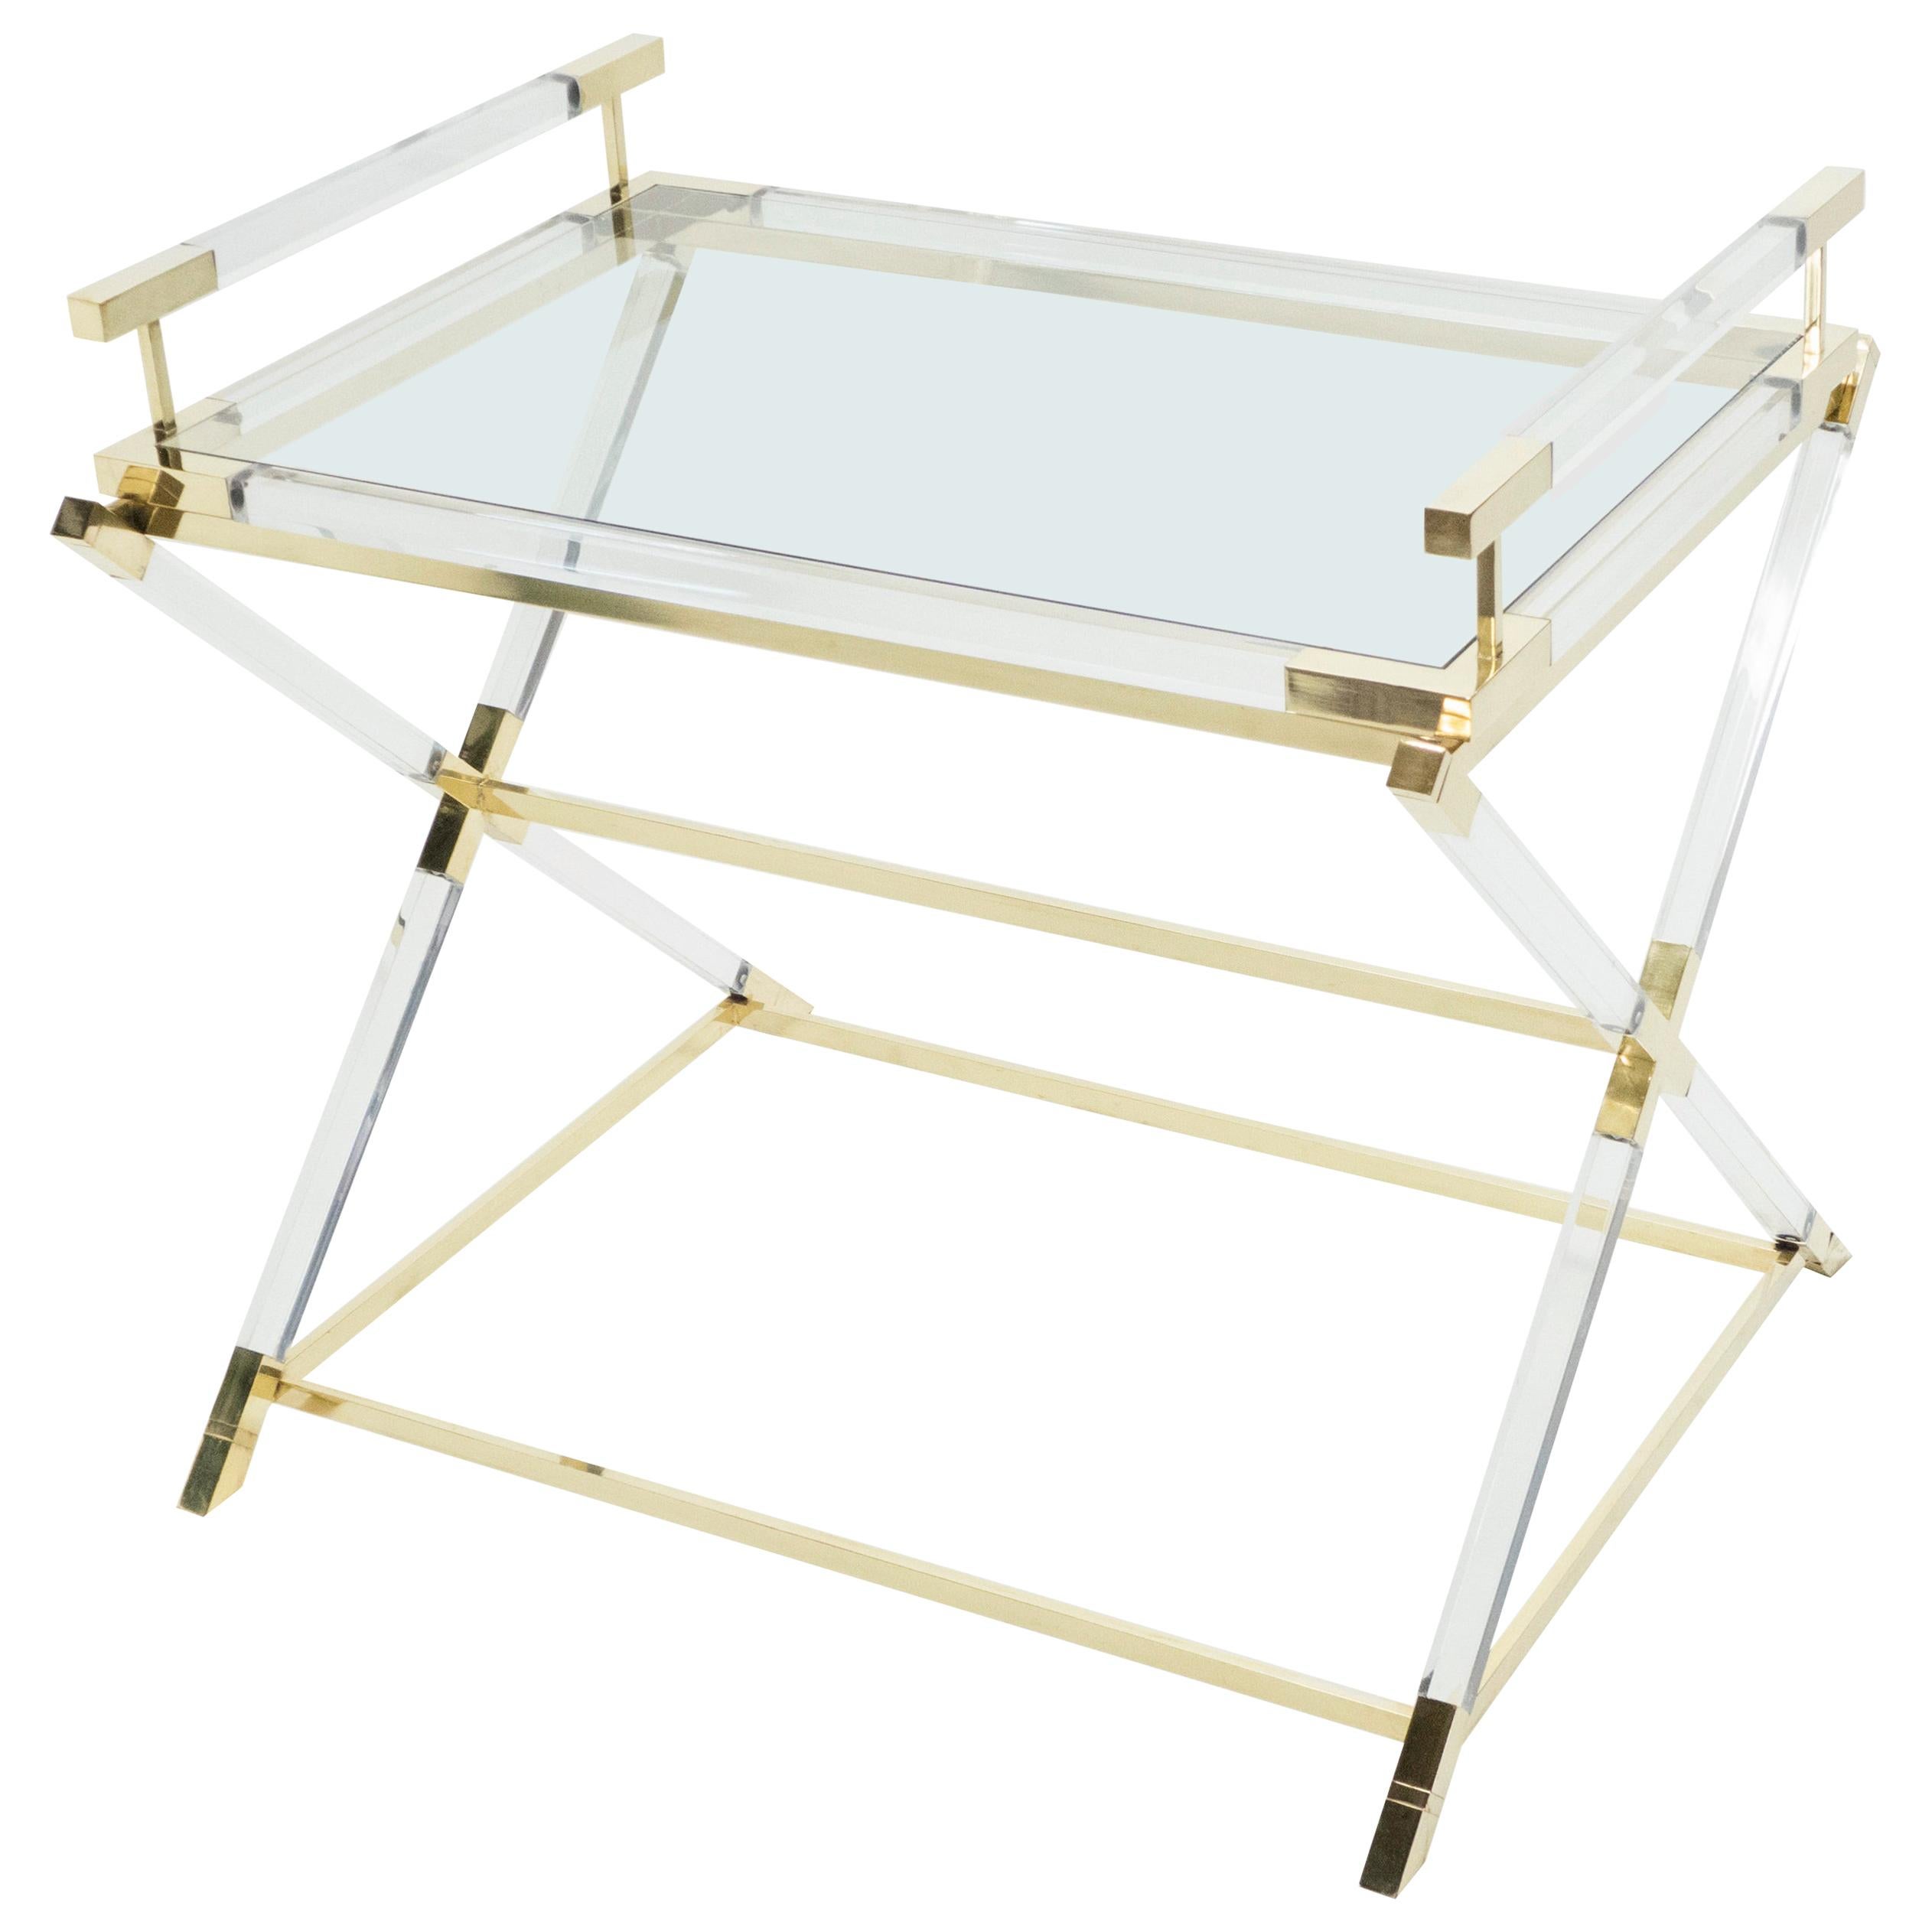 Rare French Side Tray Table Lucite and Brass Maison Jansen, 1970s